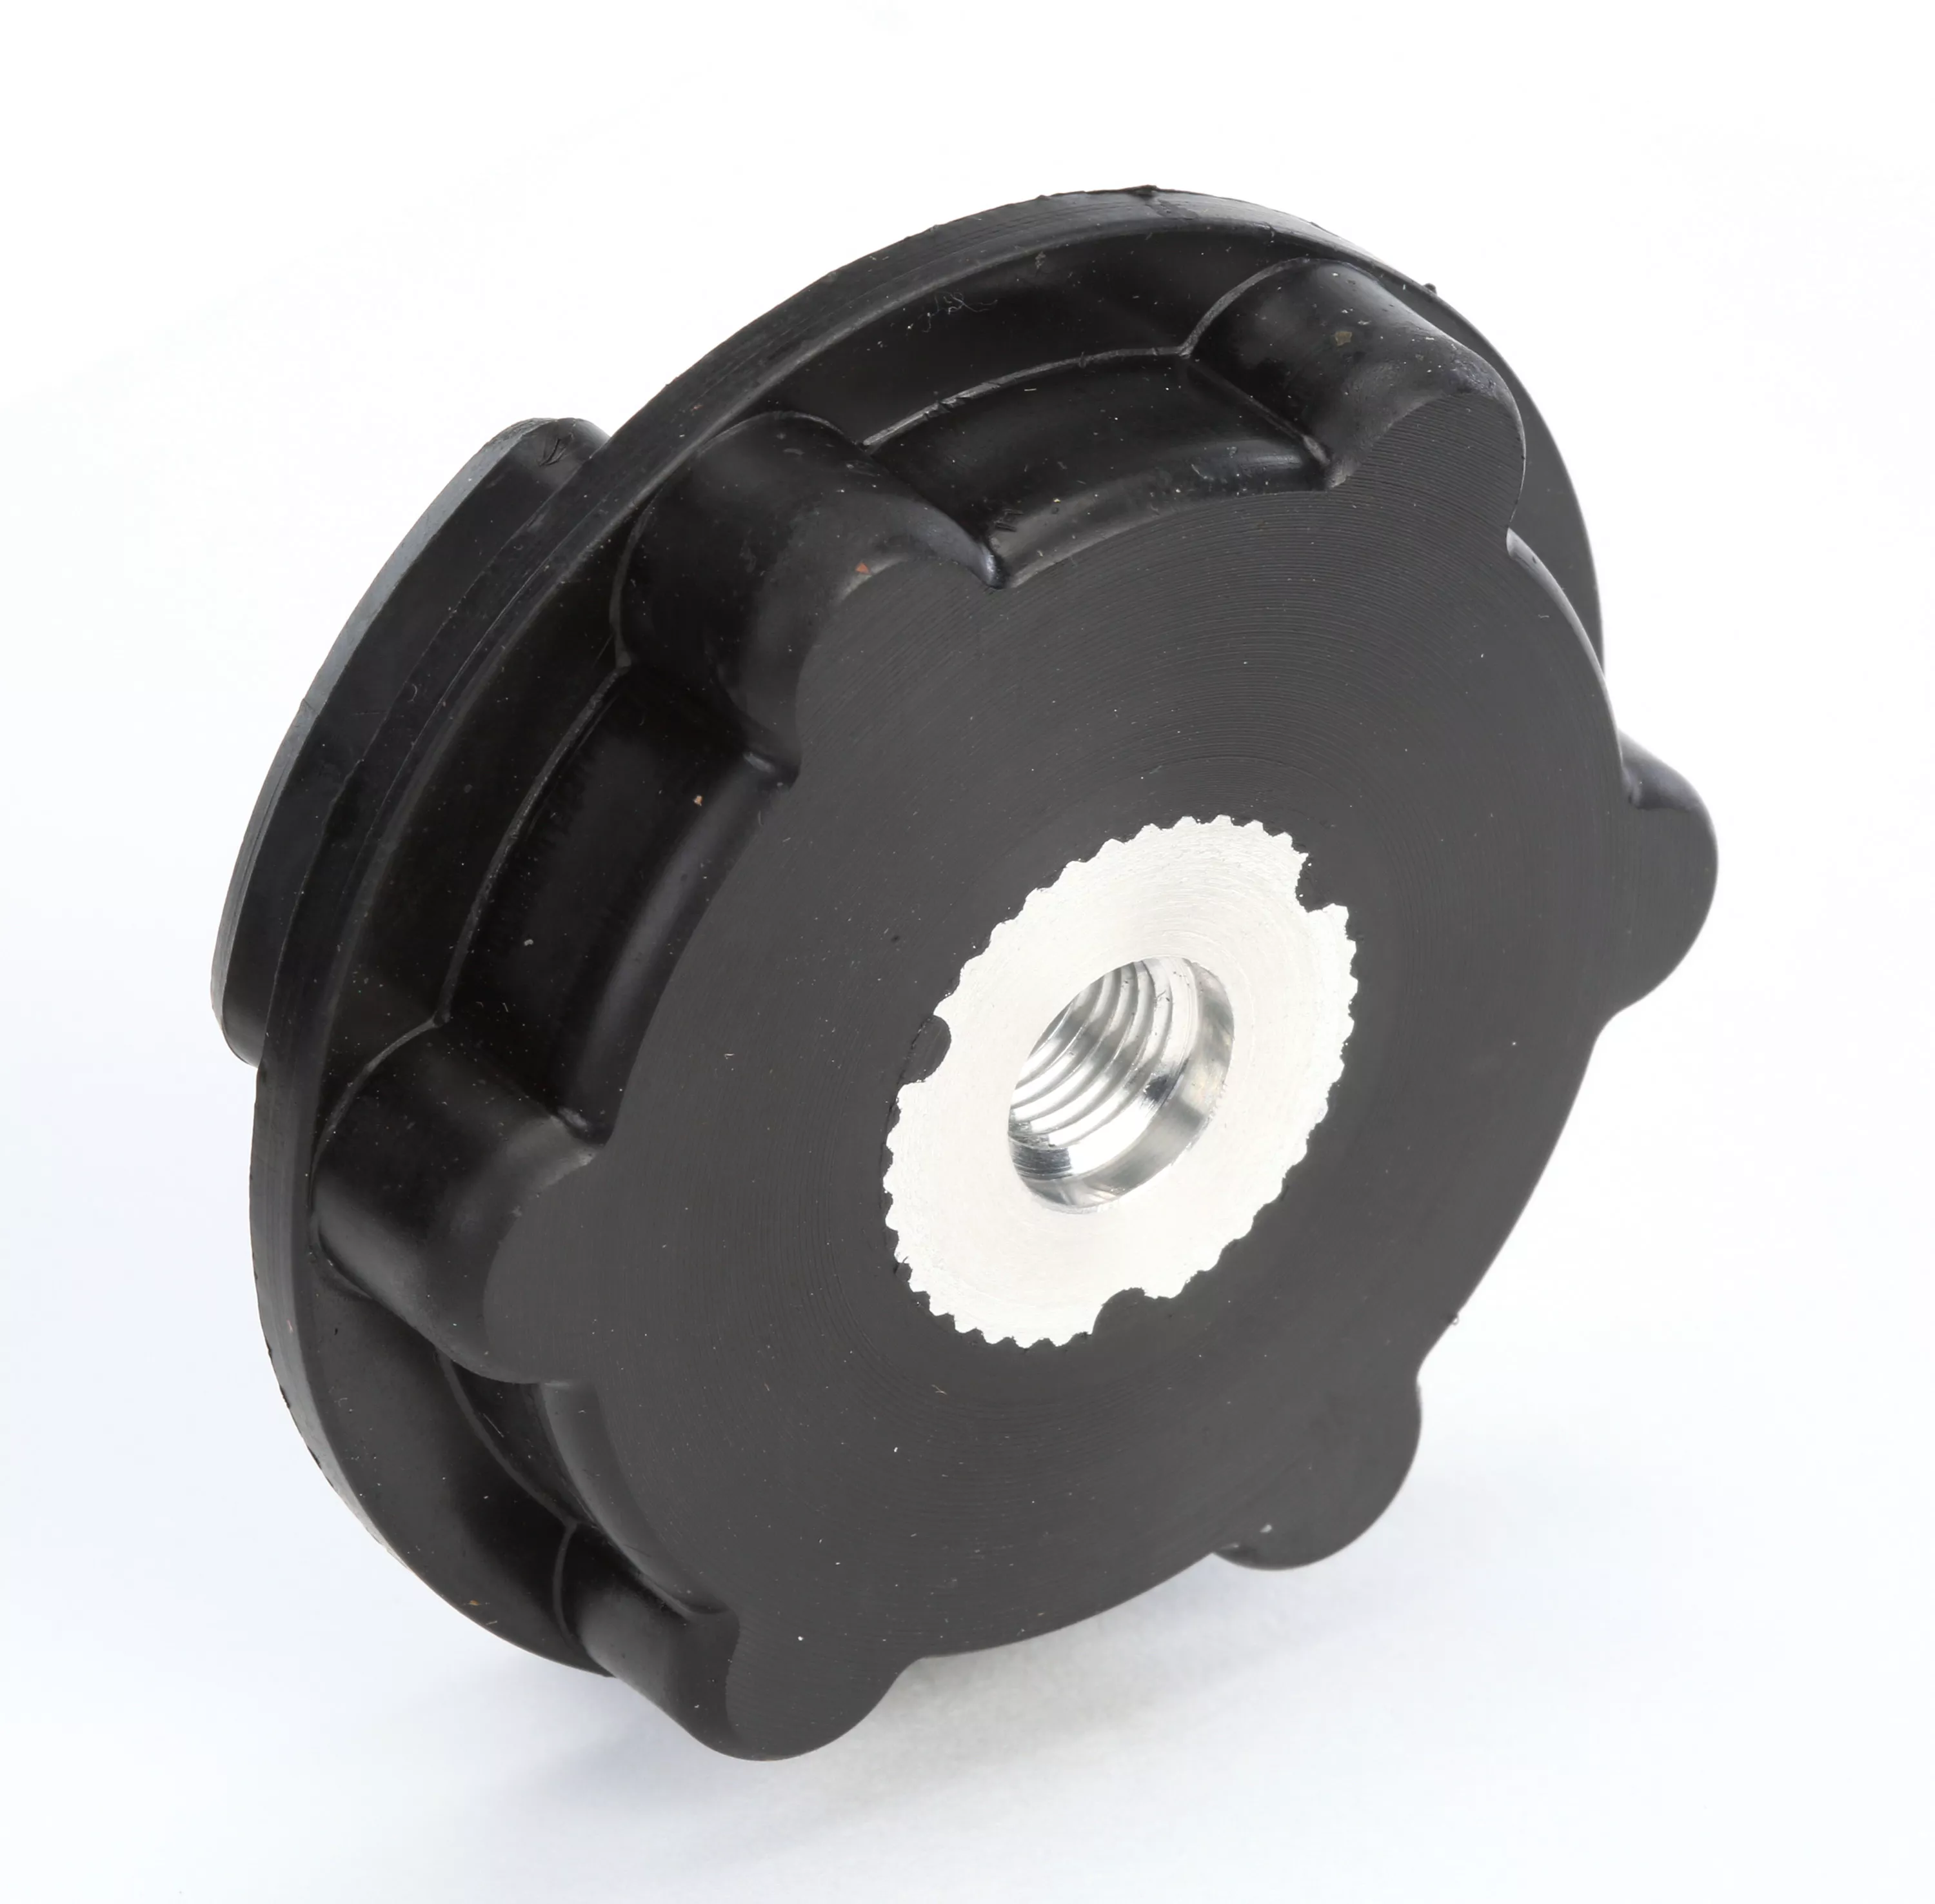 3M™ Disc Pad Hub 28442, 2-1/2 in 3/8 in-24 Internal For Short Shaft Tool, 10 ea/Case